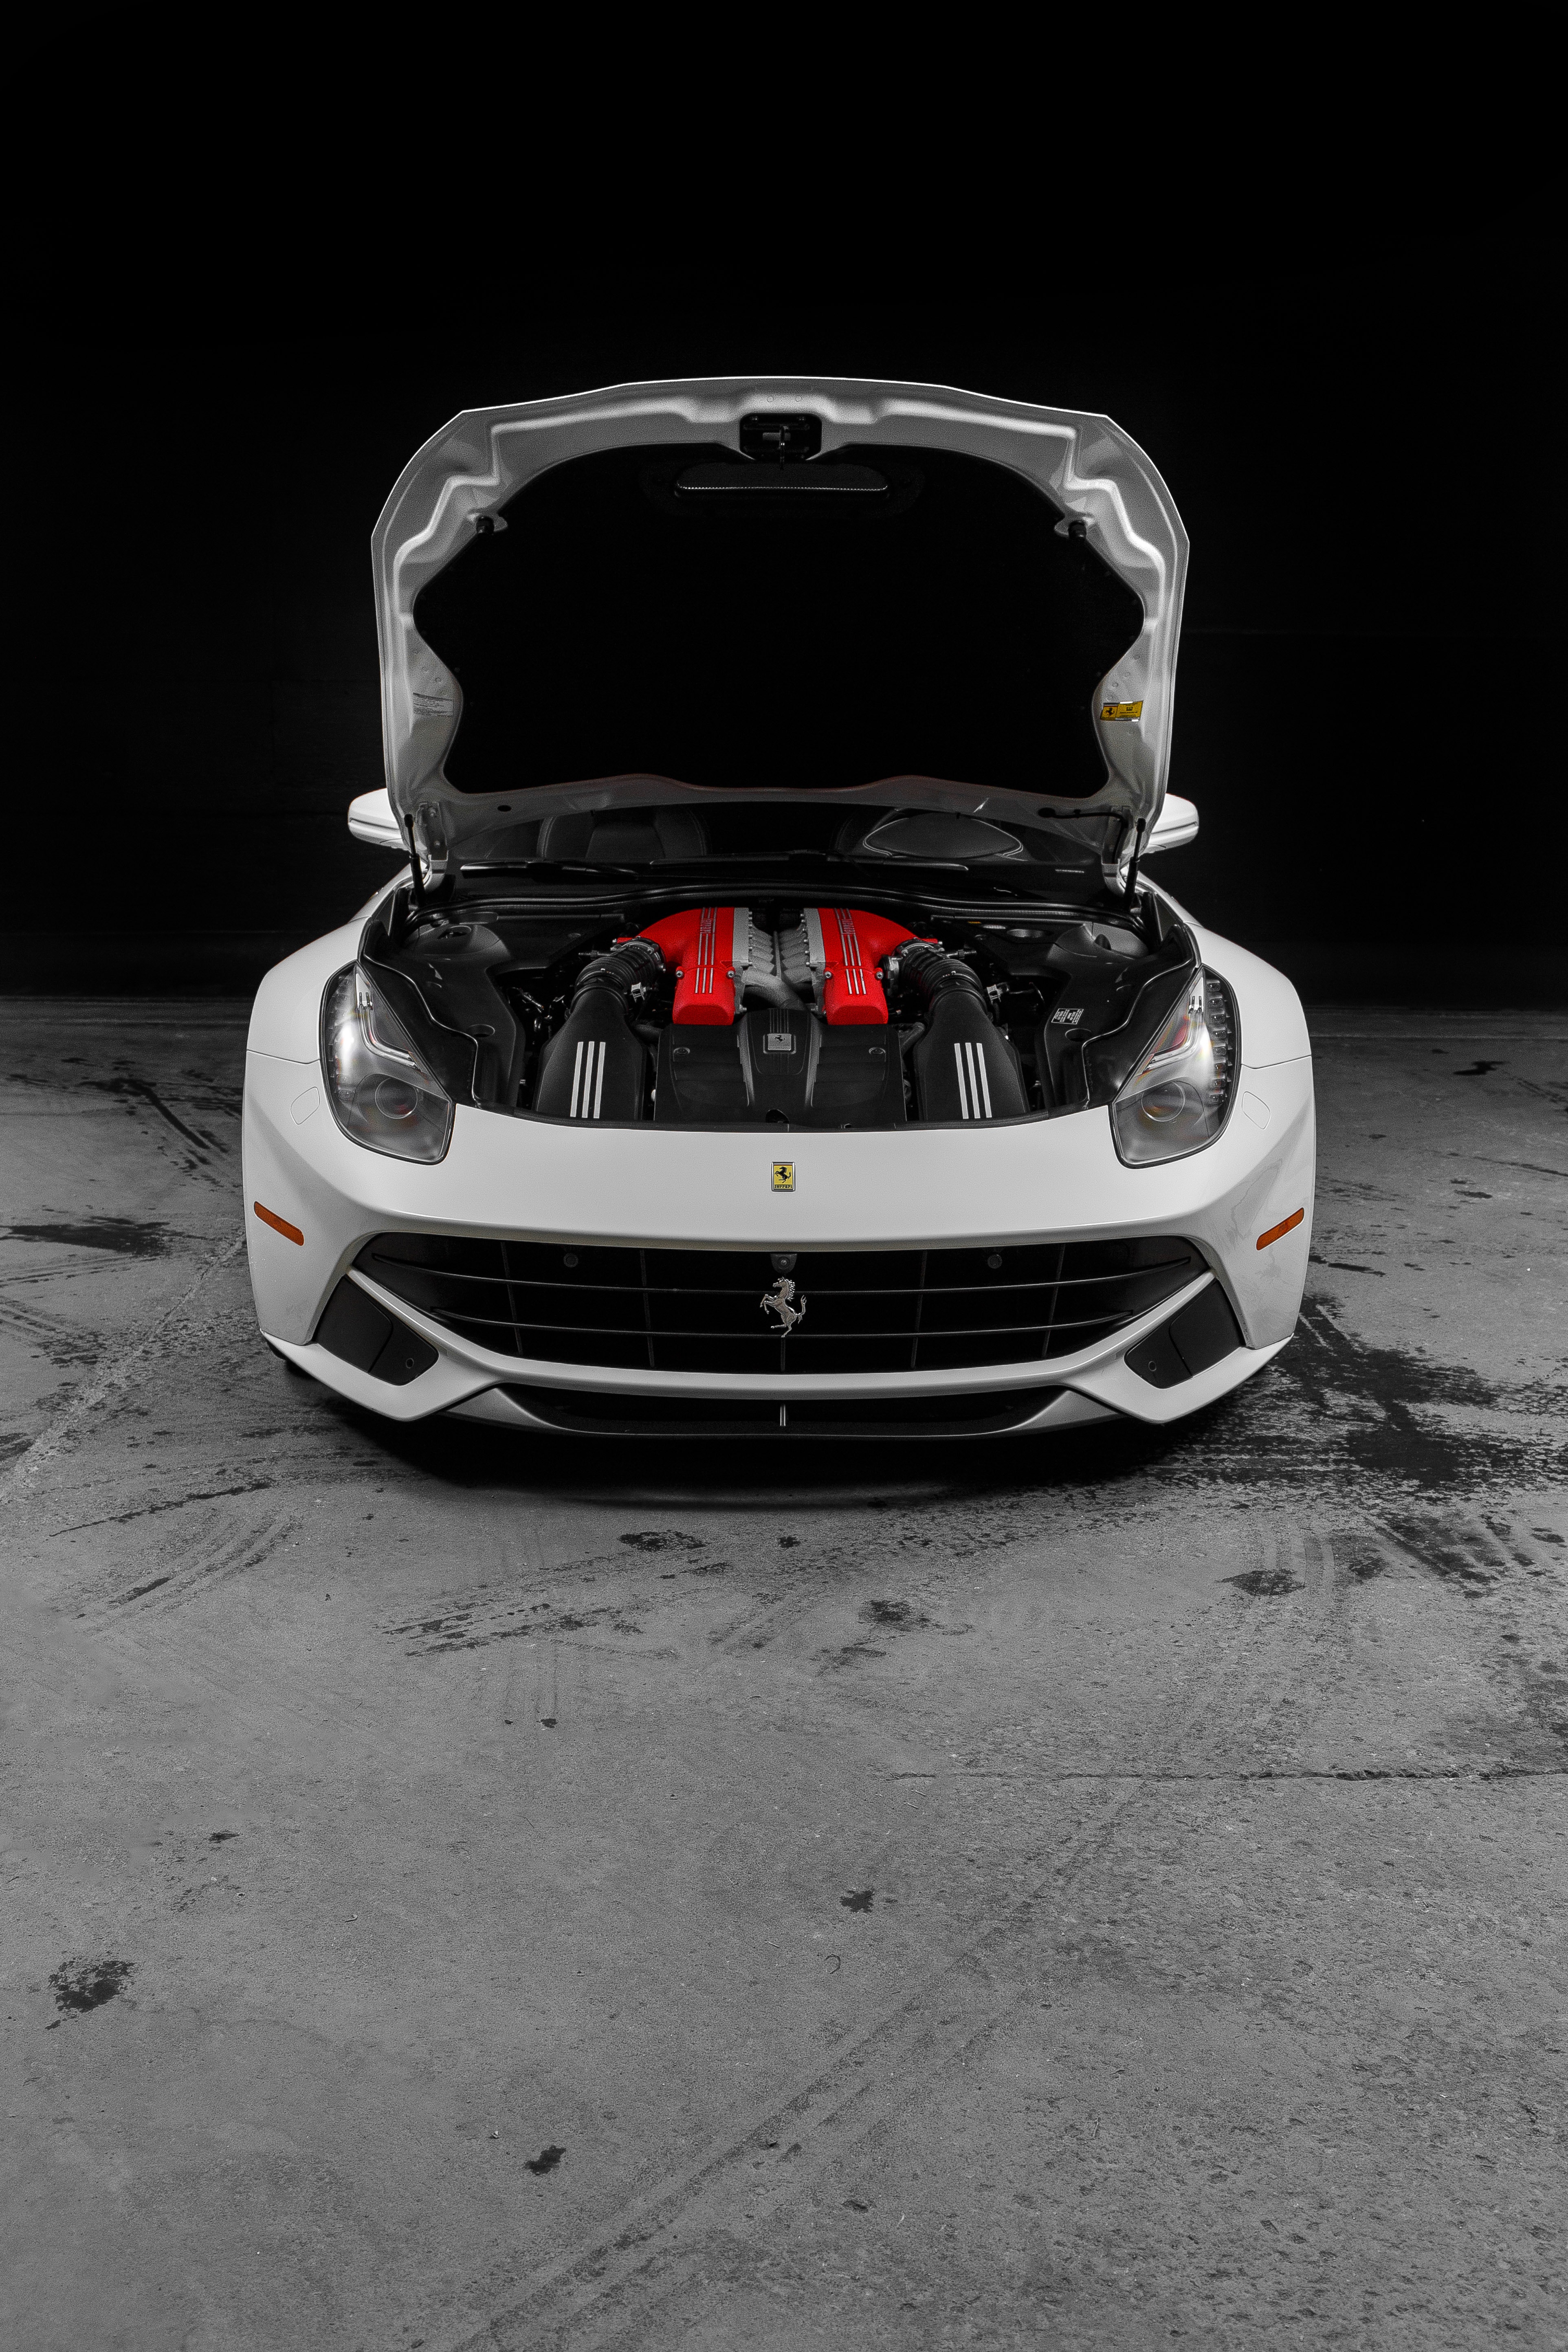 121411 Screensavers and Wallpapers Hood for phone. Download sports, ferrari, minimalism, sports car, engine, hood, body, heart of the car pictures for free